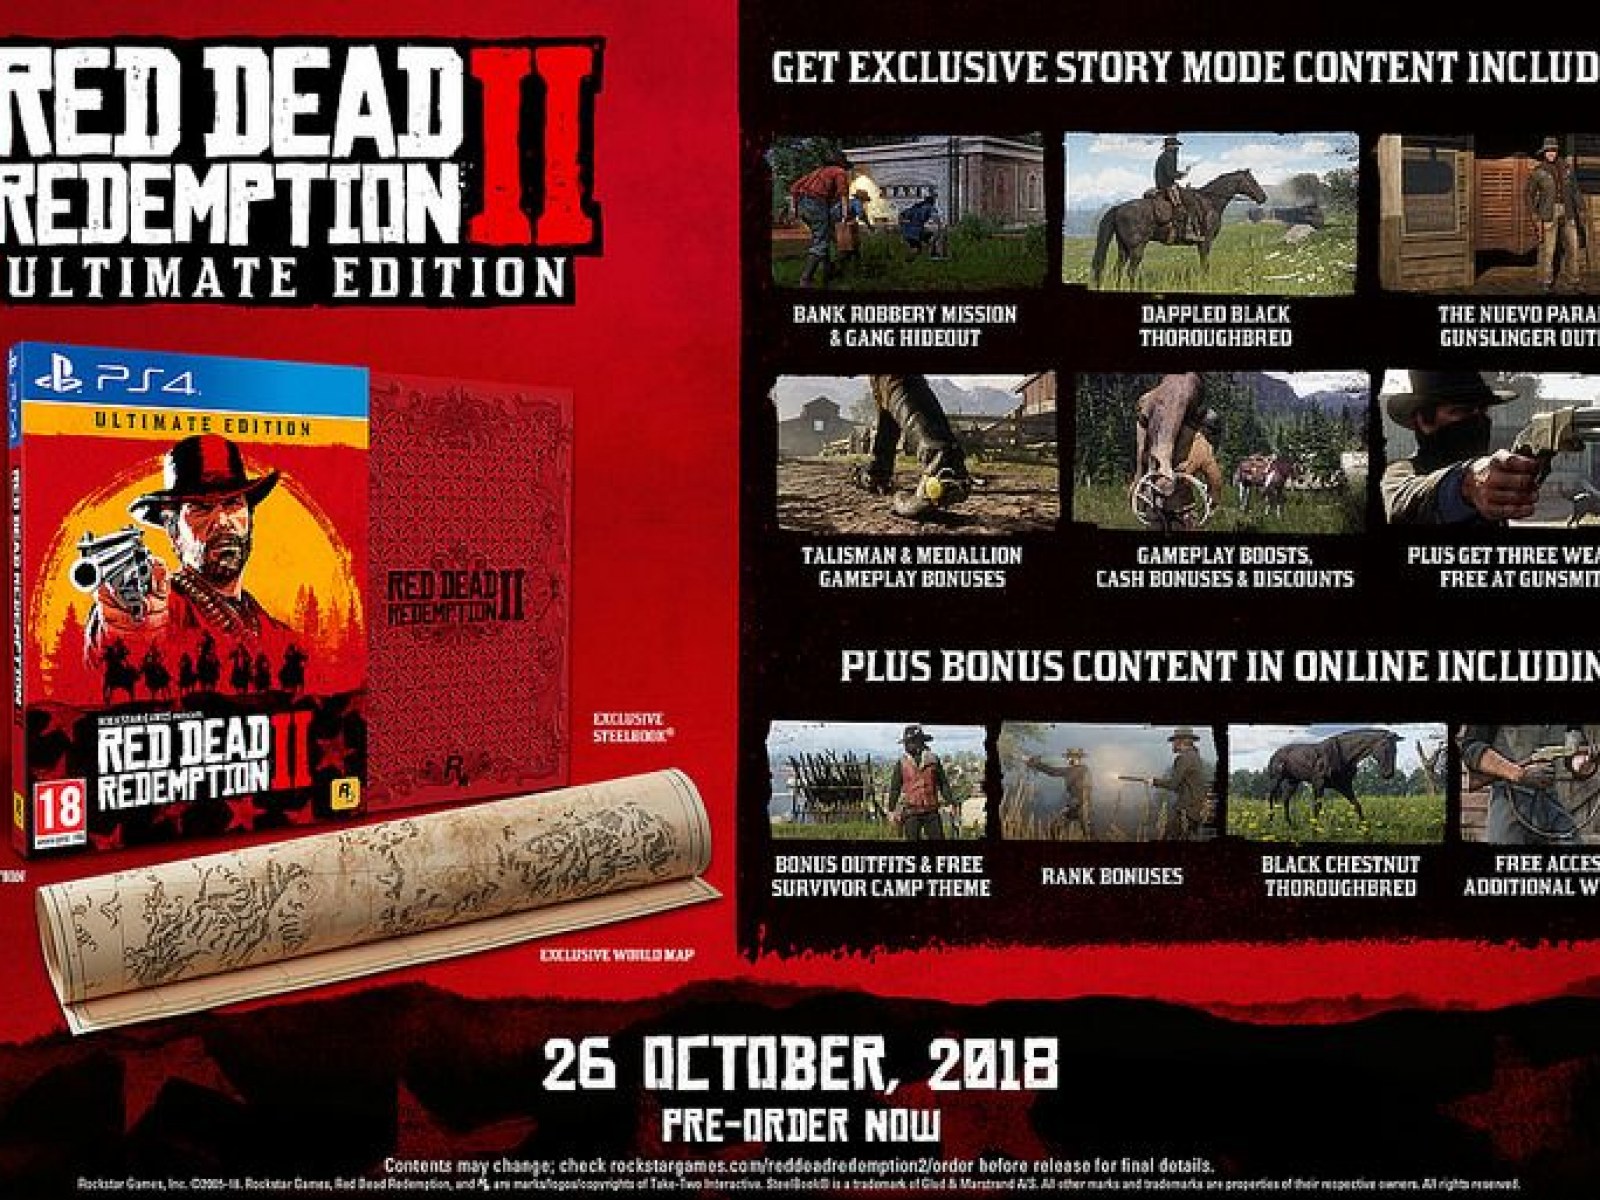 What Is Red Dead 2 Ultimate Edition Unlock Exclusive Online Perks